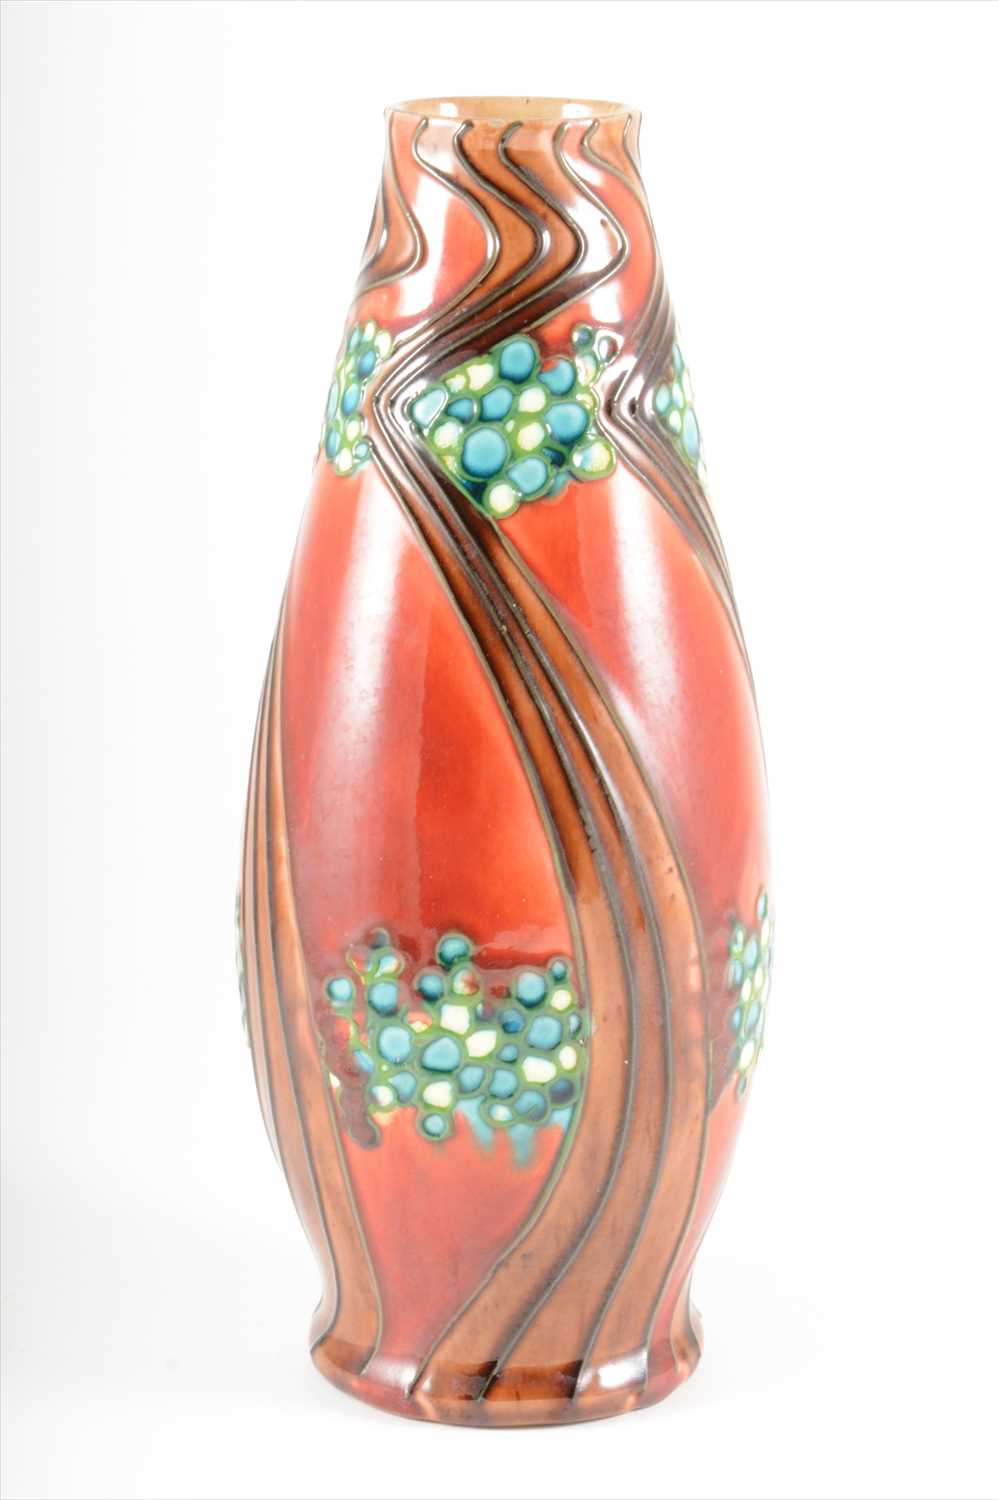 Lot 23 - A 'Secessionist' series vase, designed by John Wadsworth and Leon Solon for Minton.